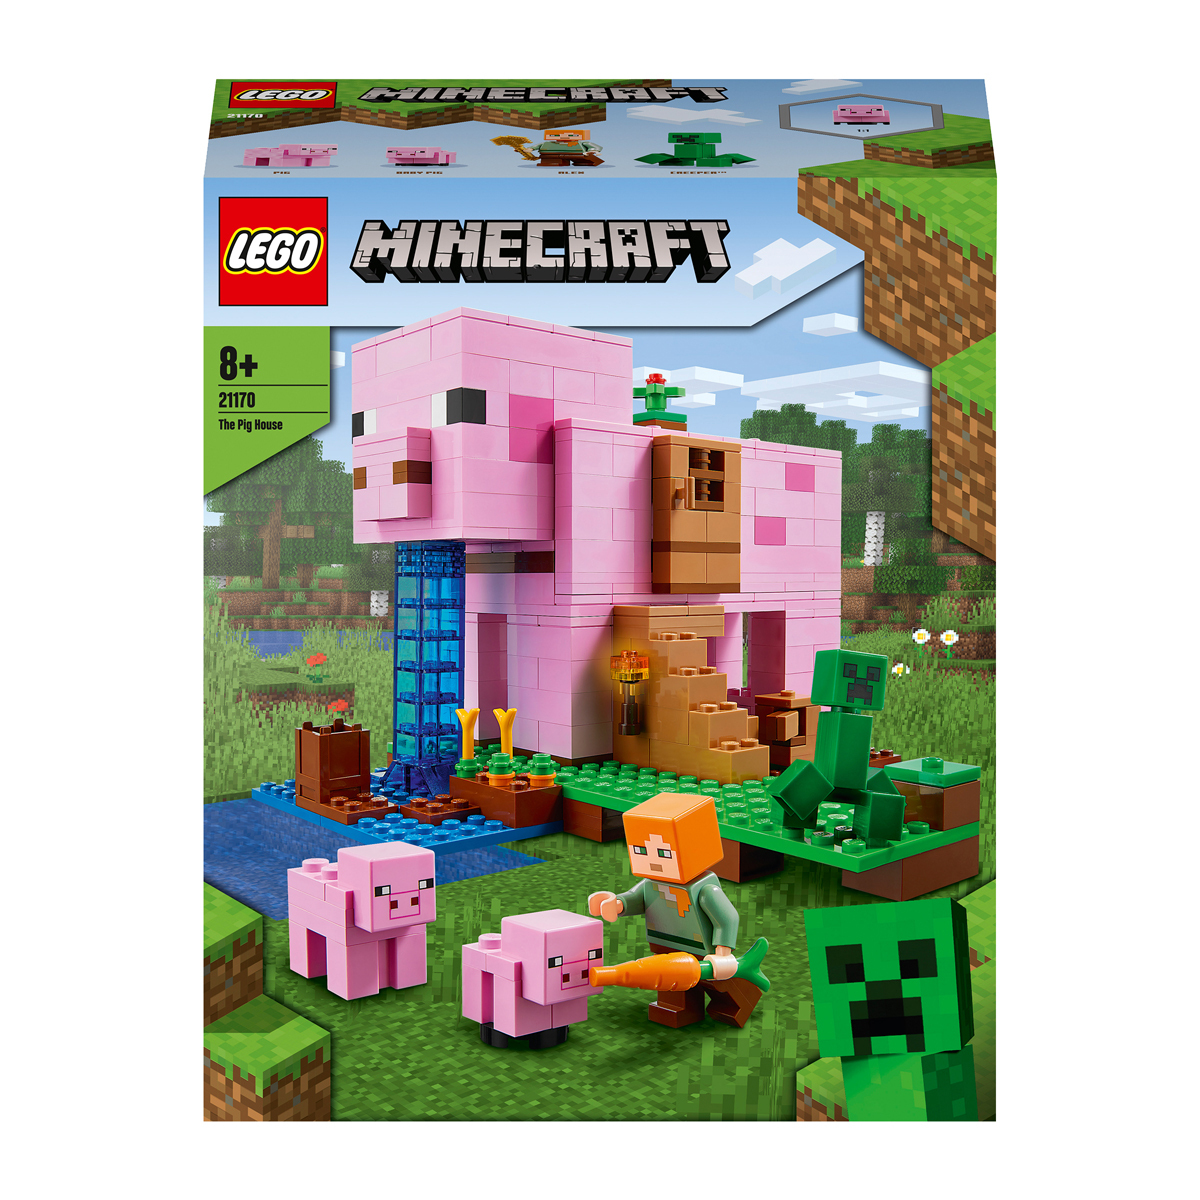 LEGO Minecraft The Pig House & Animal Figures 21170 | The Entertainer